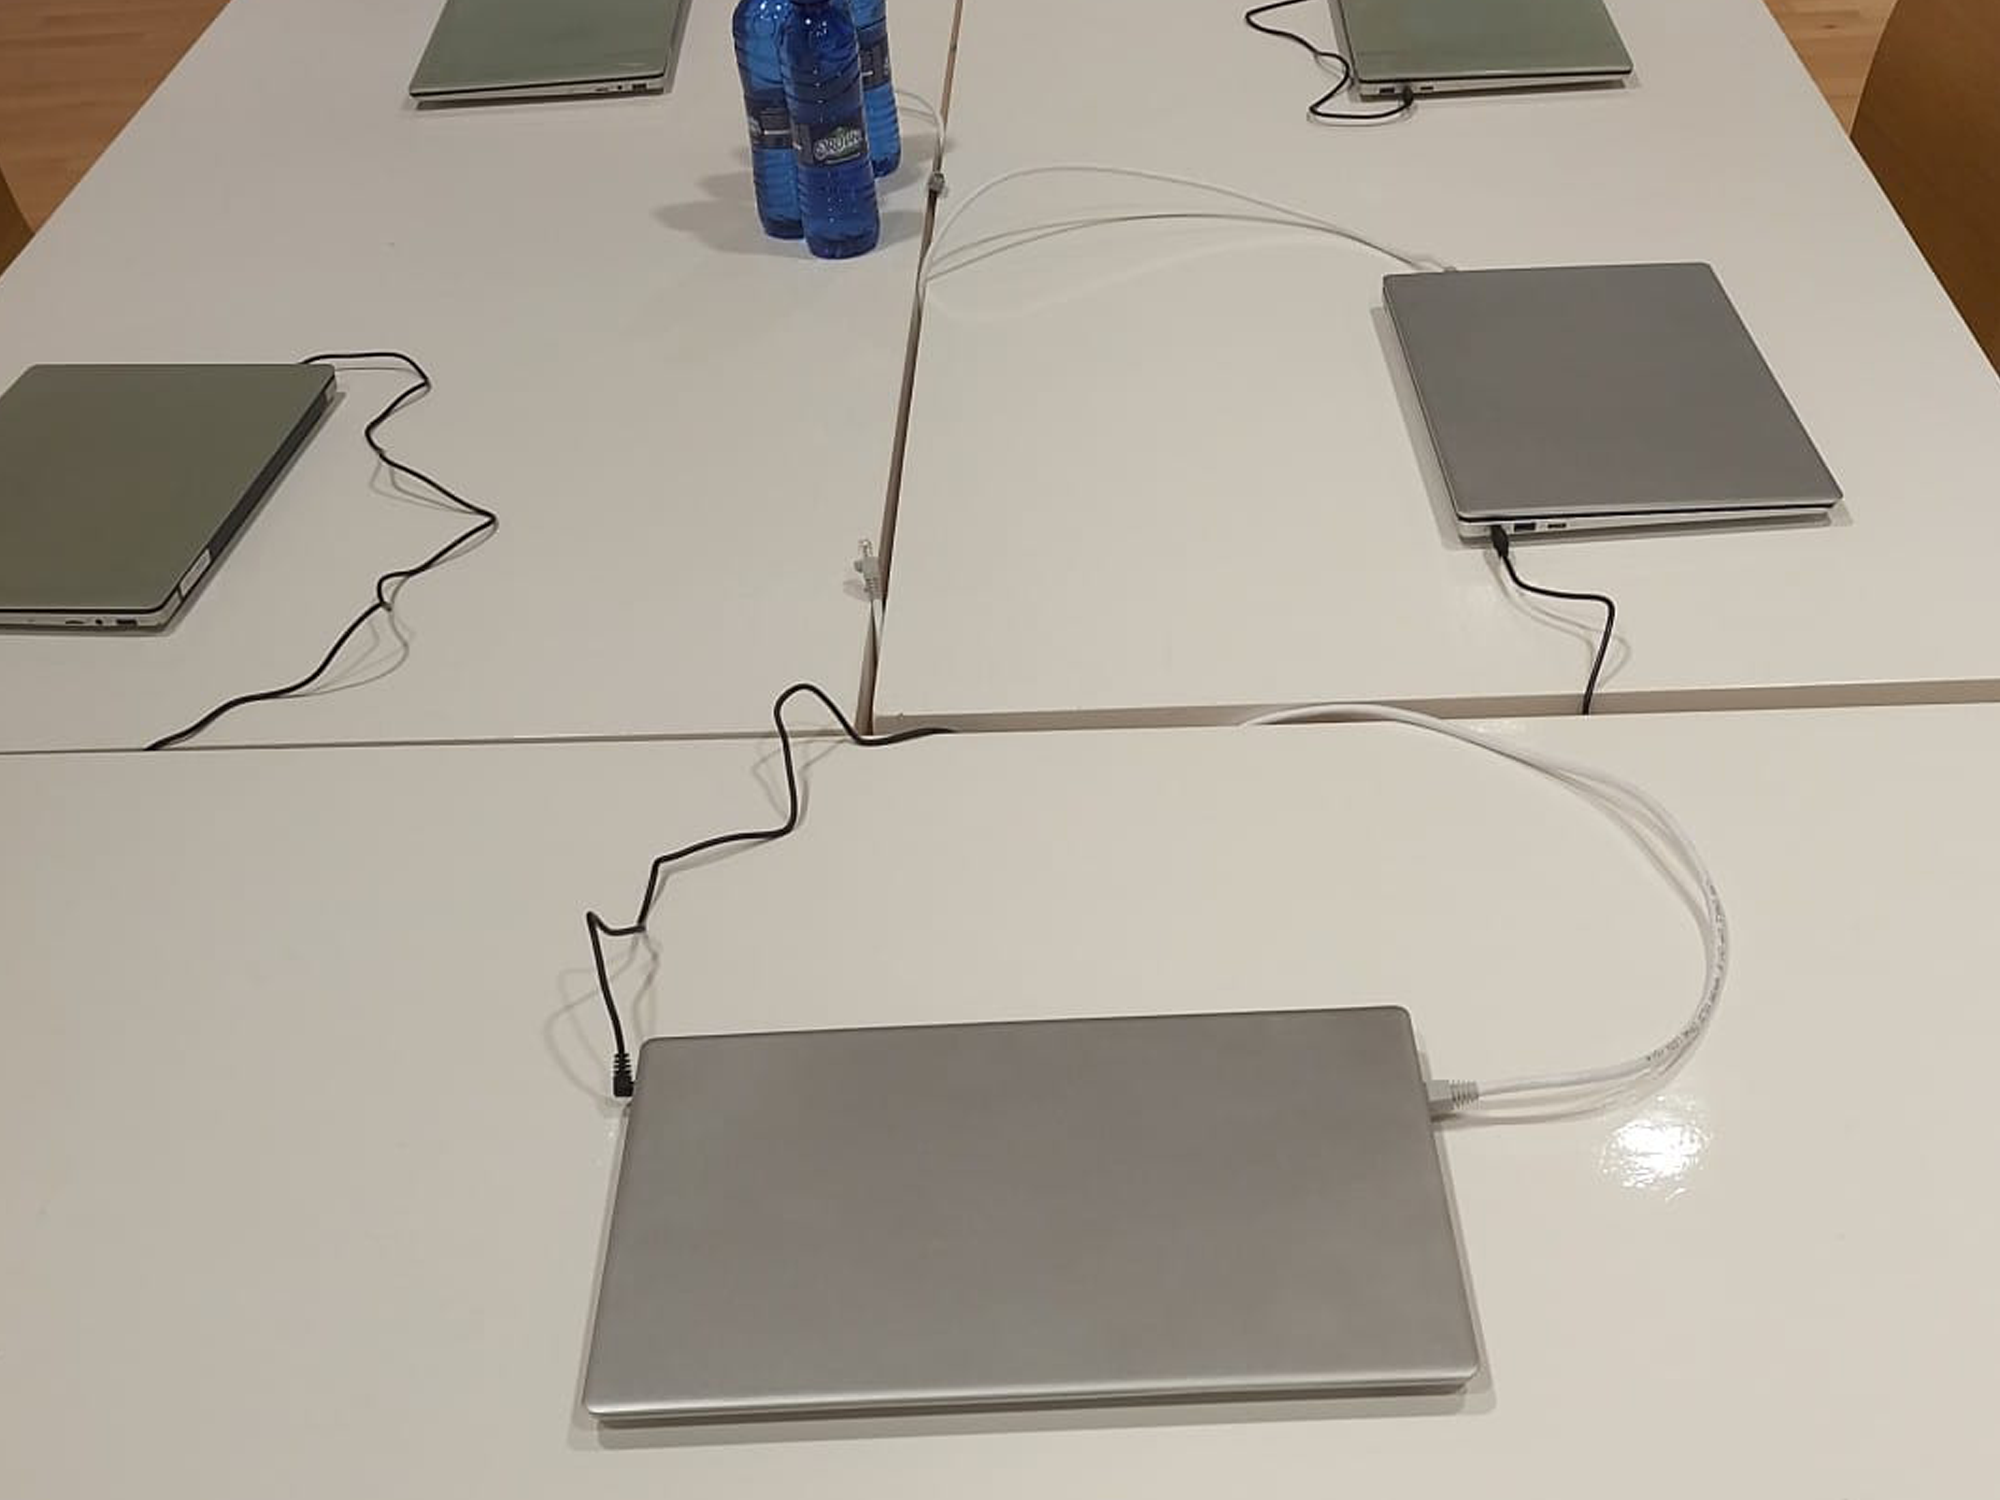 A group of laptops connected to a wire